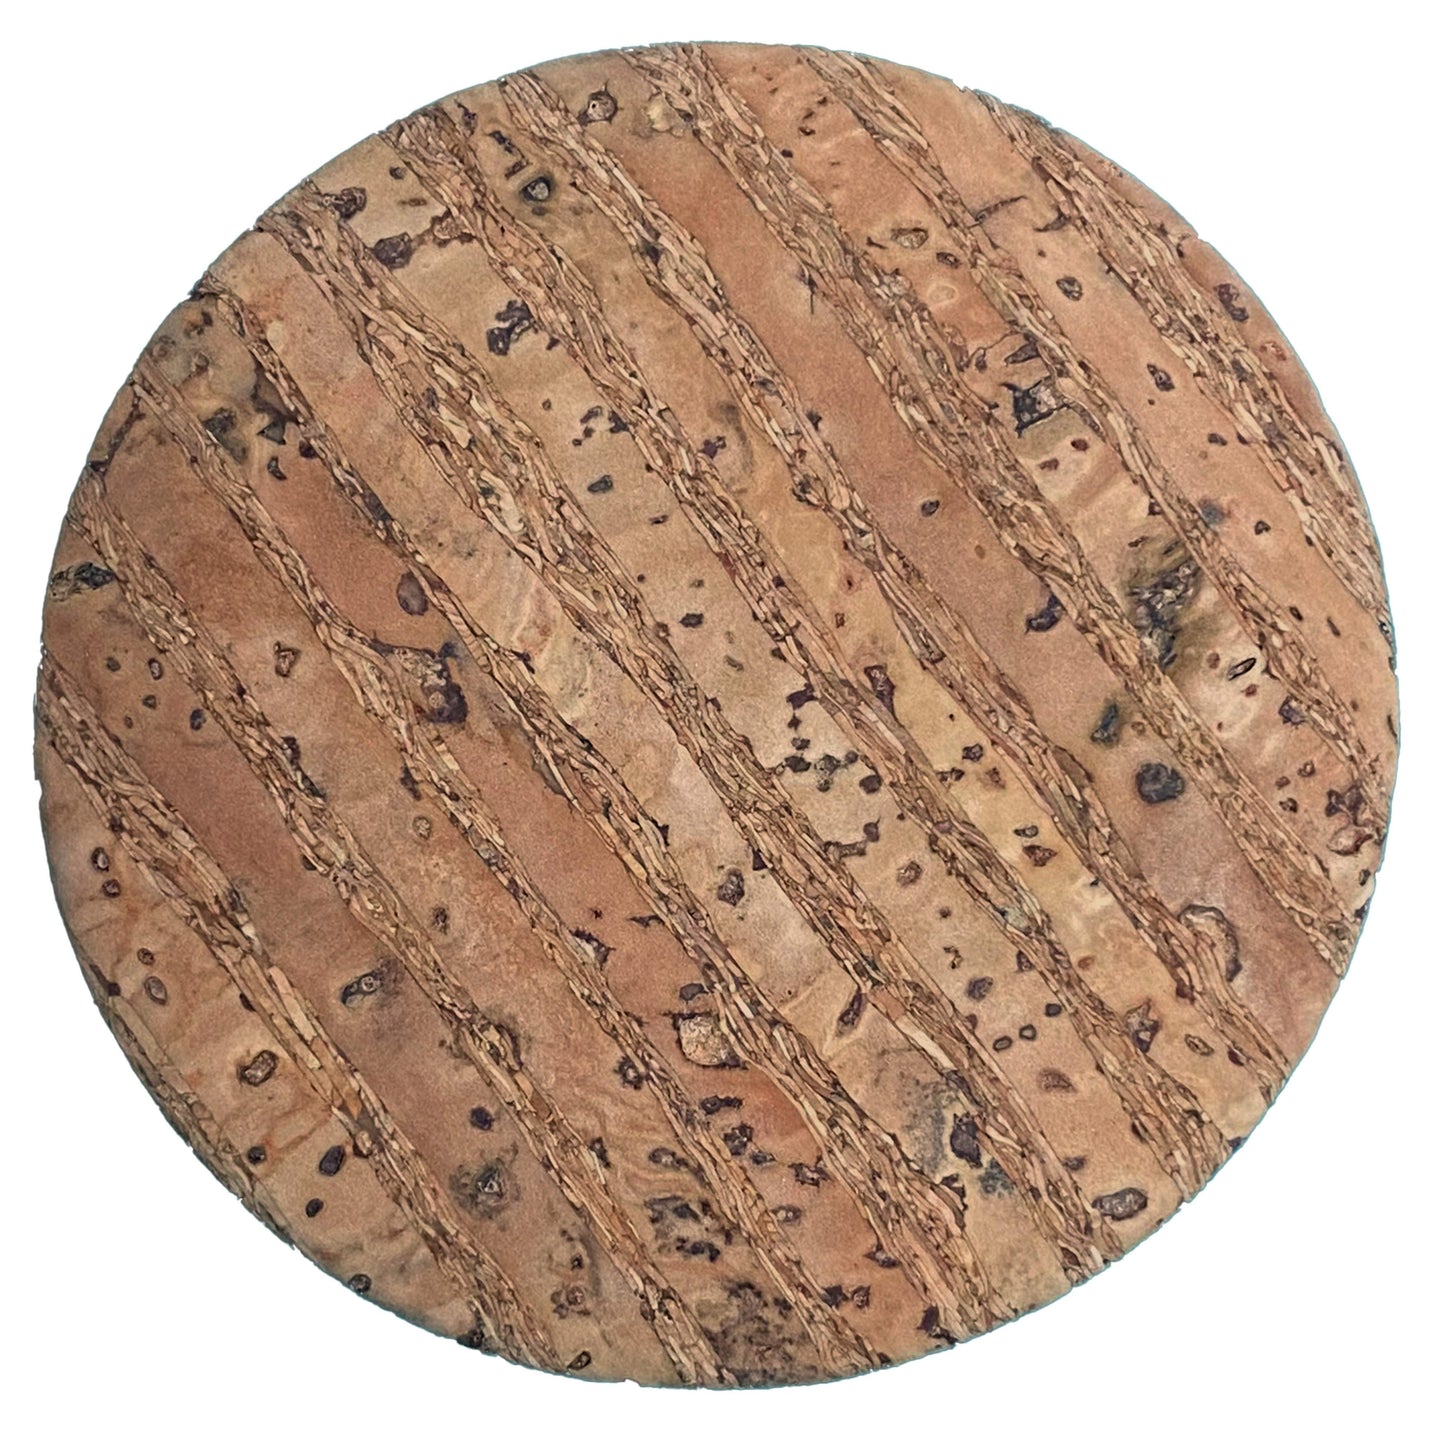 Natural Cork Buttons - Small and Large - 3 Card Pack